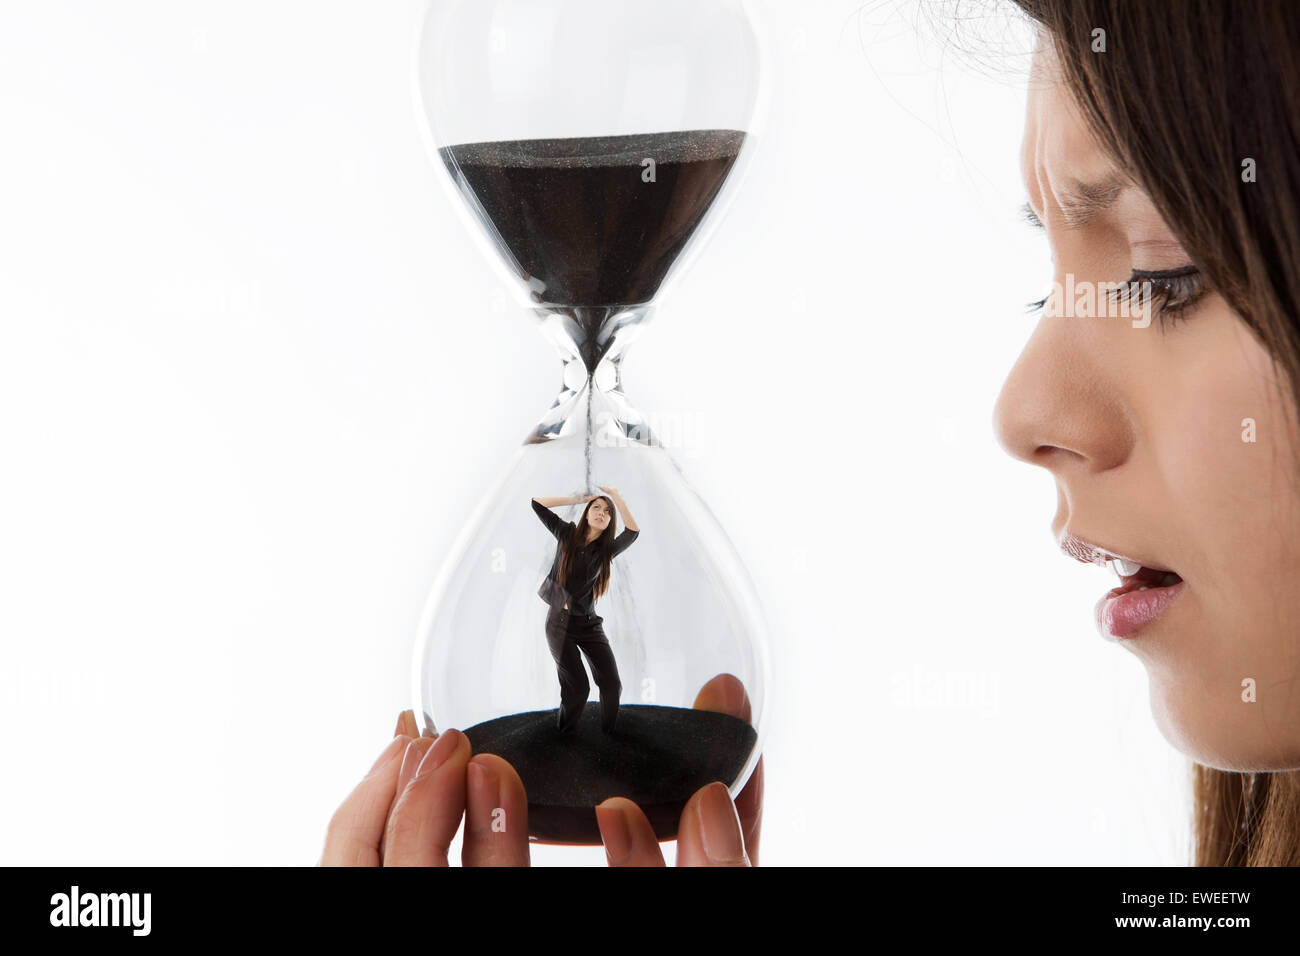 woman holding up a hour glass sand timer watching time slip away with herself inside the glass Stock Photo